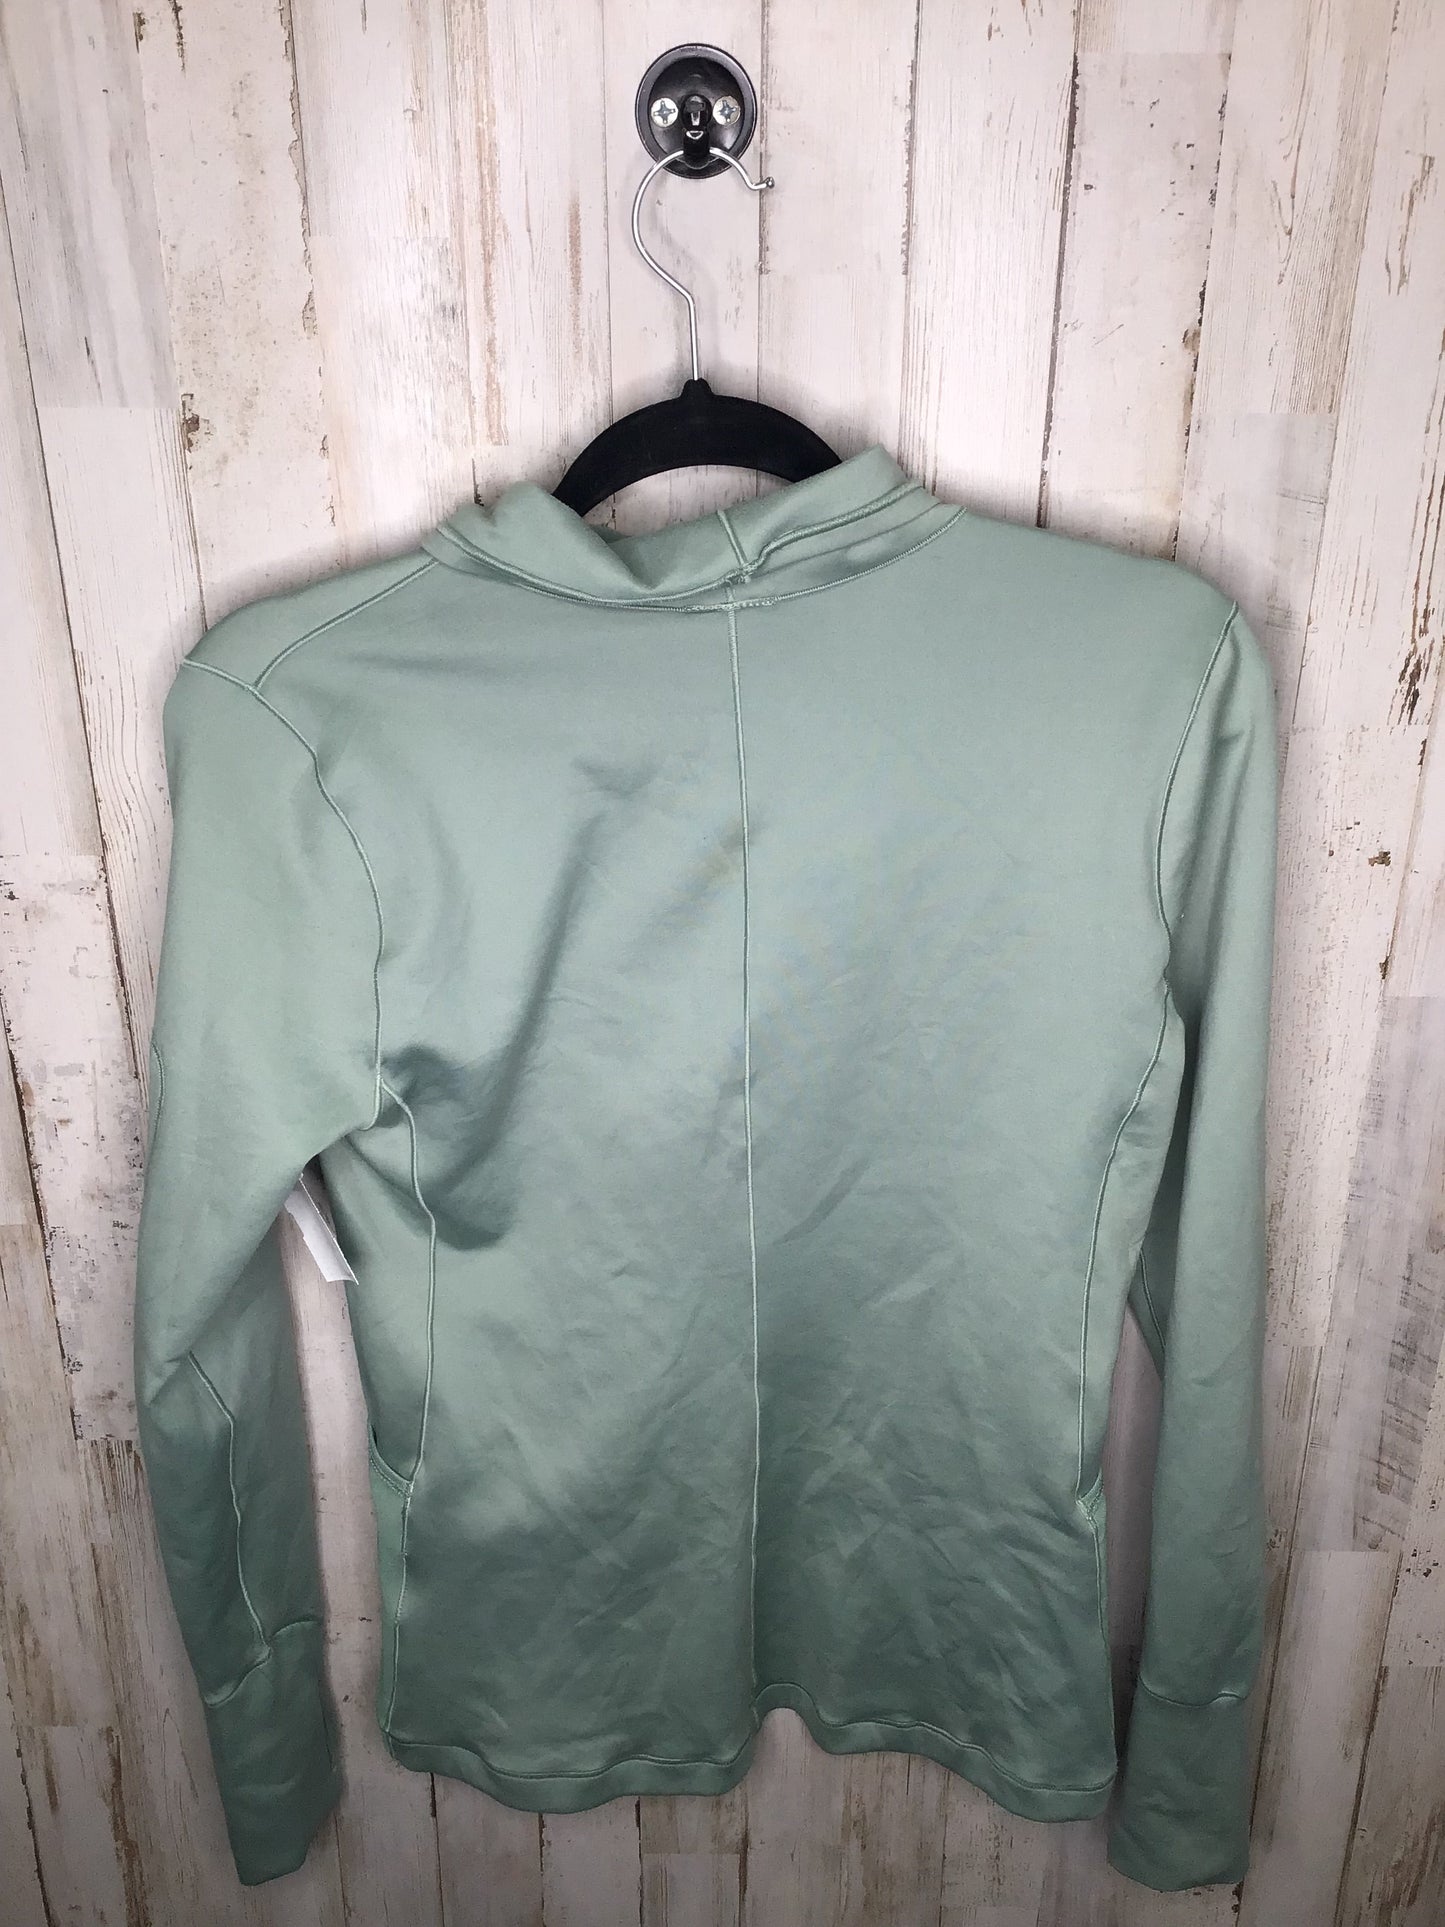 Green Athletic Top Long Sleeve Crewneck Nike, Size M